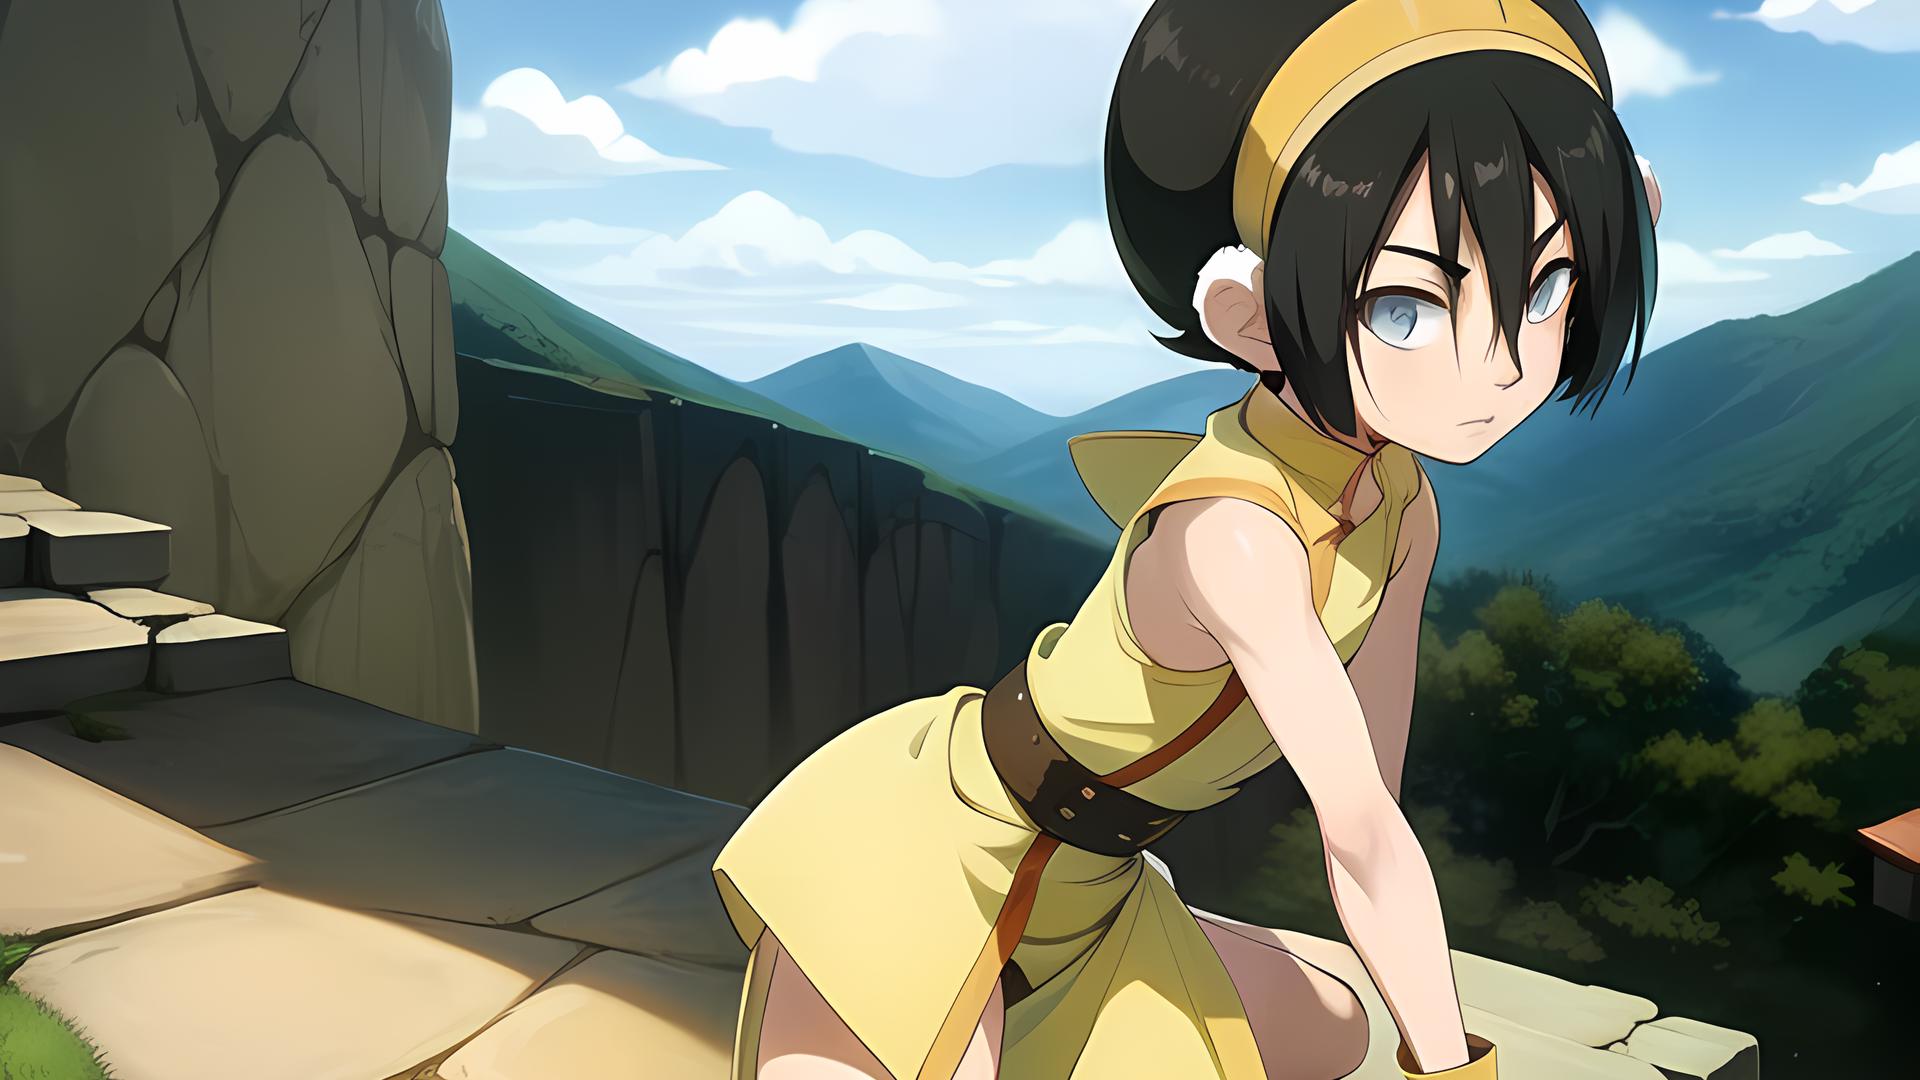 Toph Beifong image by xastolfo11521